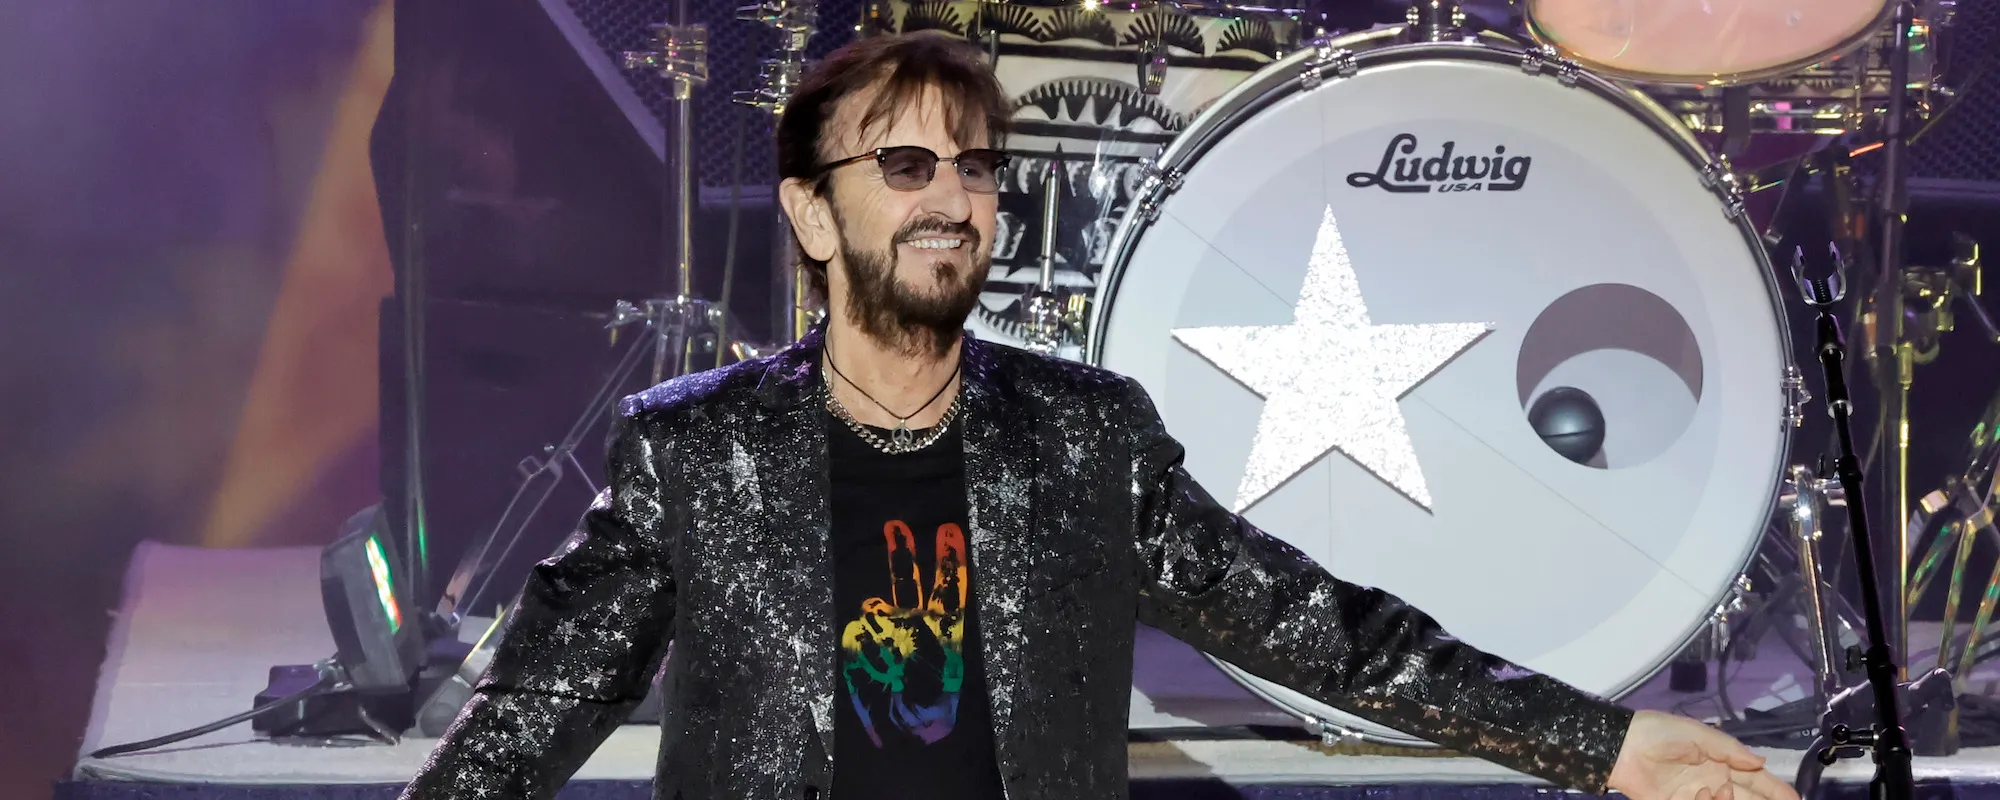 Ringo Starr Gives Update on the Beatles Song Using AI Technology: “It Should’ve Been out Already”